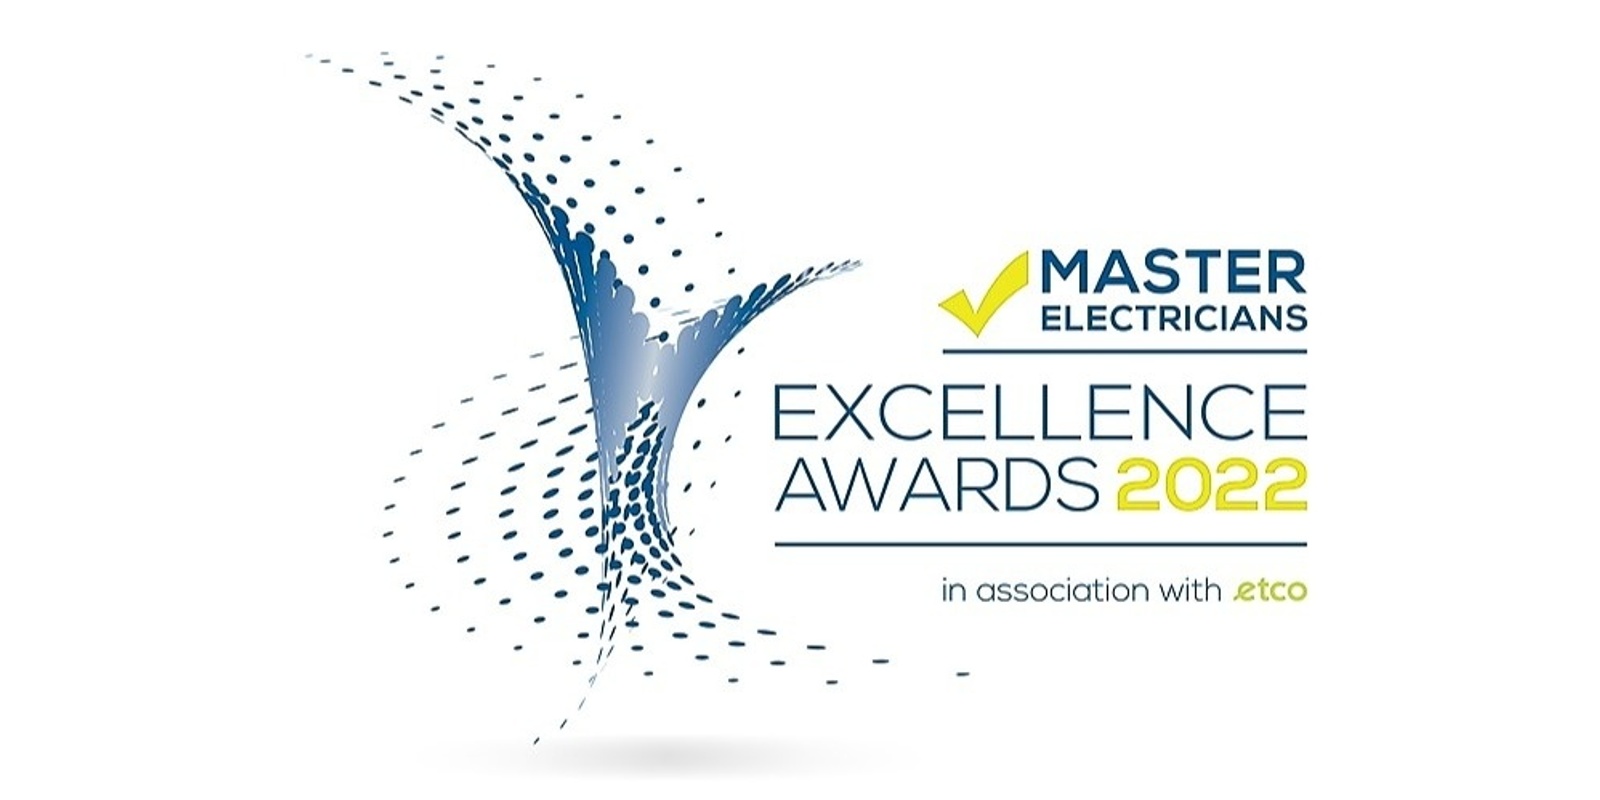 Banner image for Master Electricians Excellence Awards 2022 in association with etco